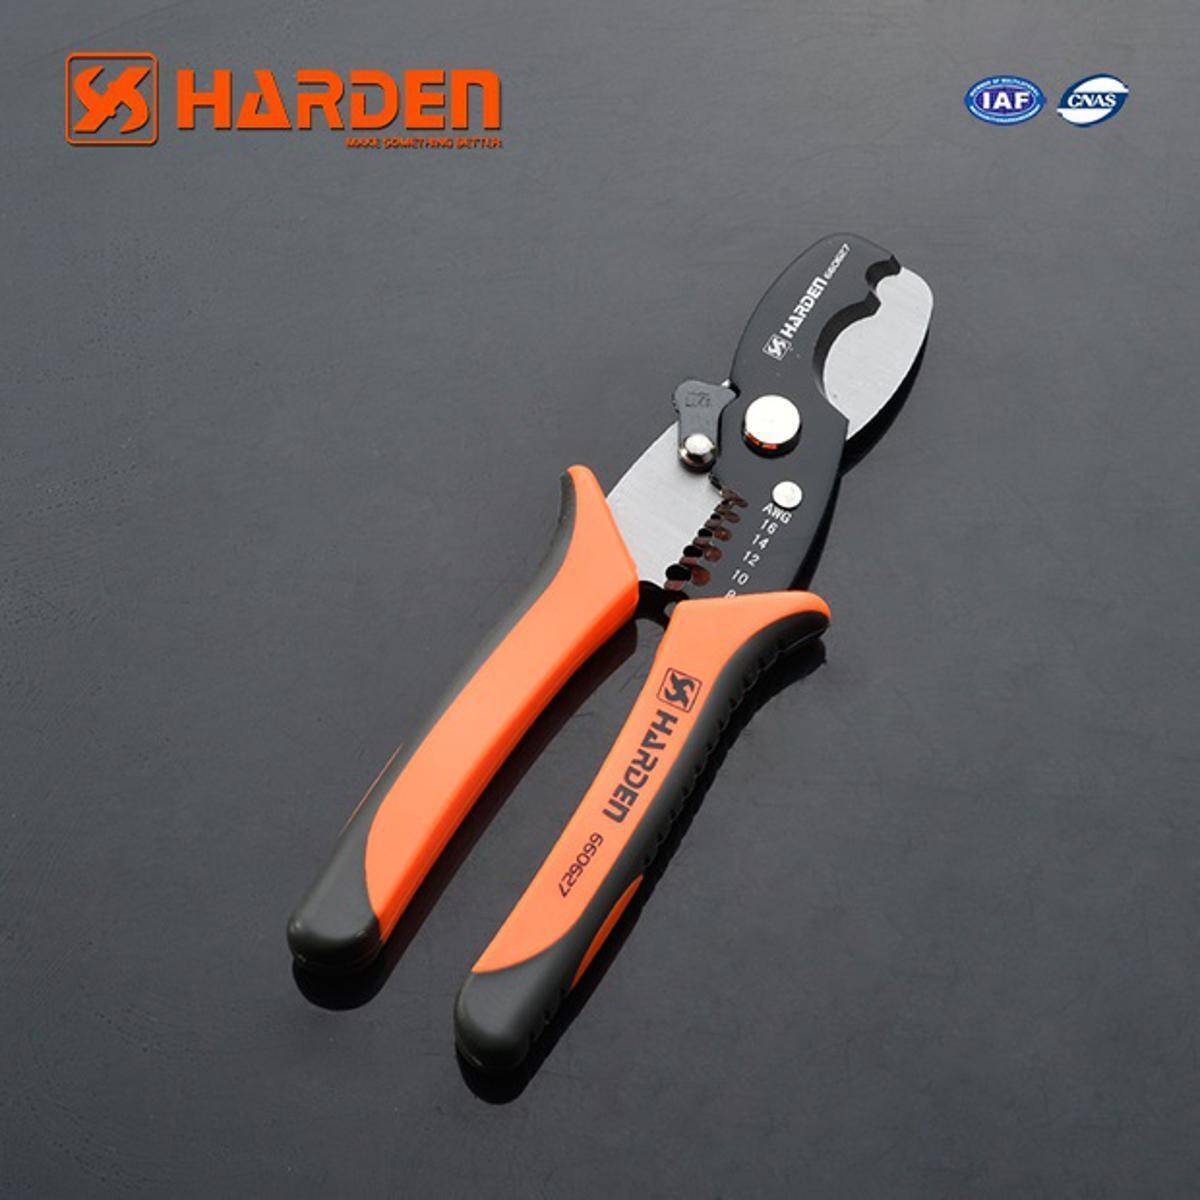 Professional Auto-Oil Glass Cutter With Aluminum Alloy